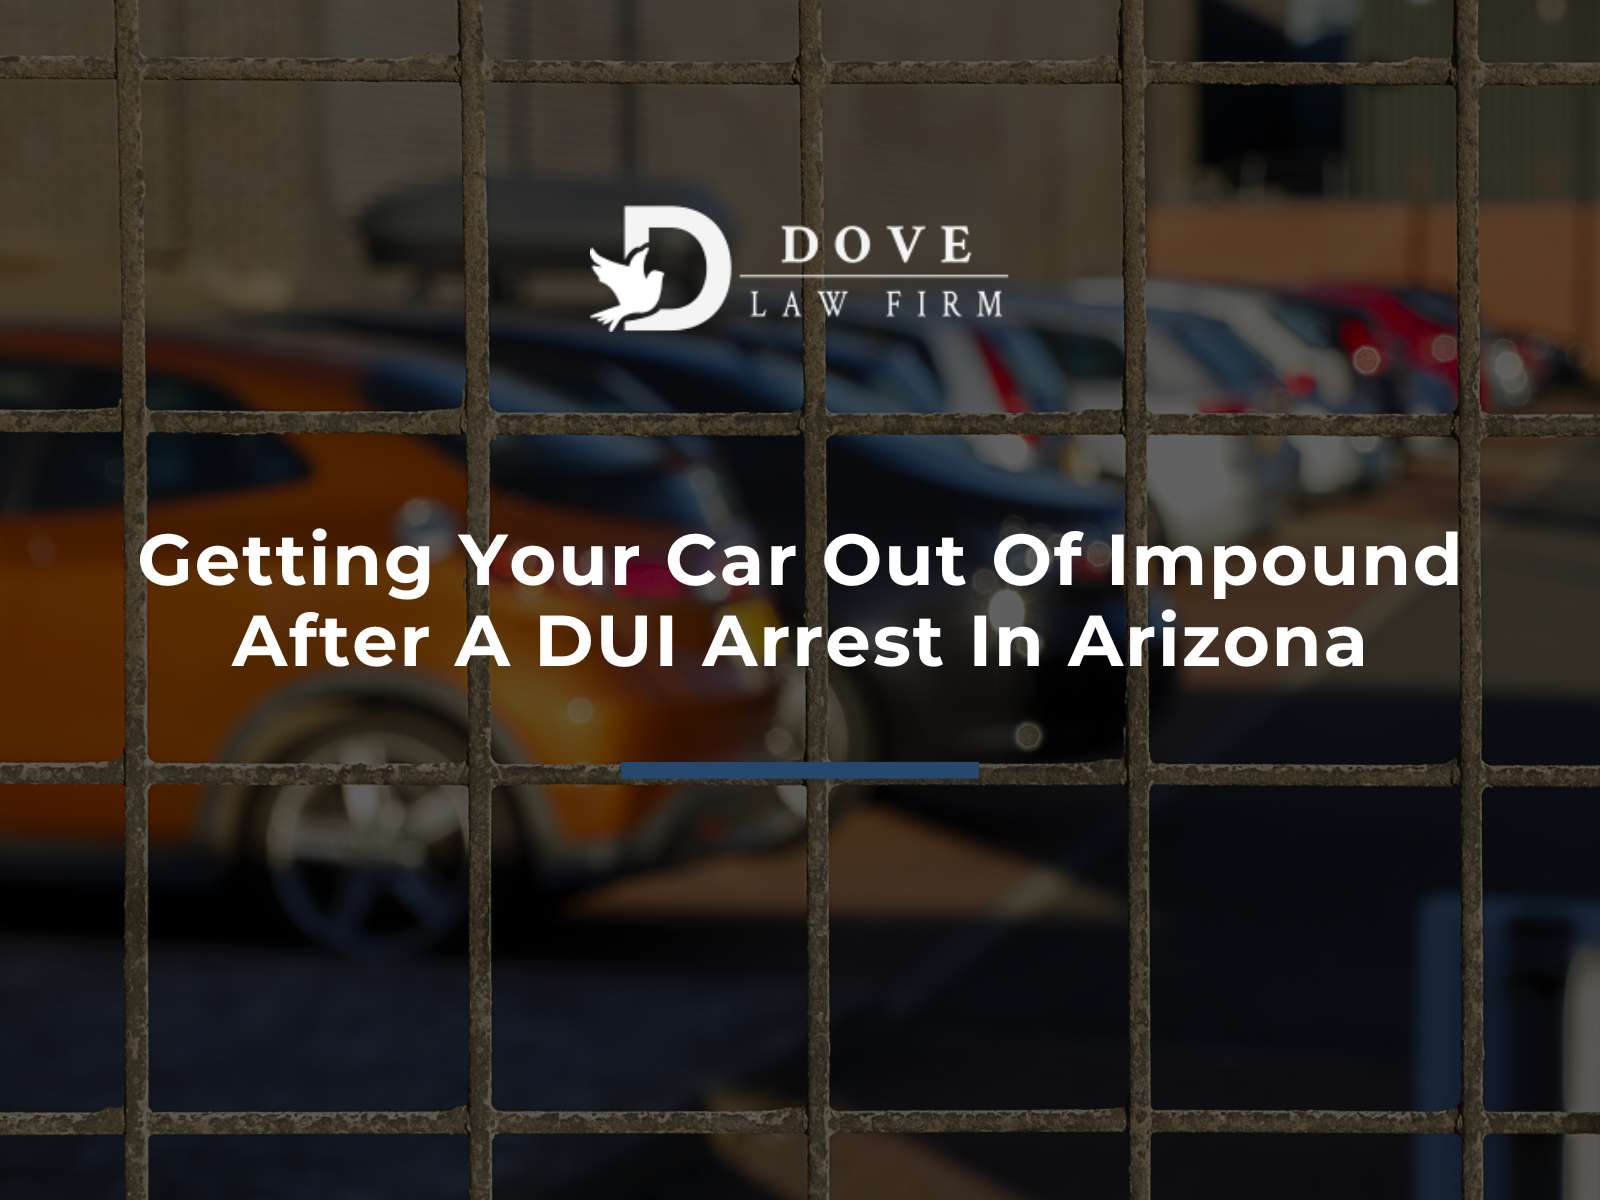 Getting Your Car Out Of Impound After A DUI Arrest In Arizona